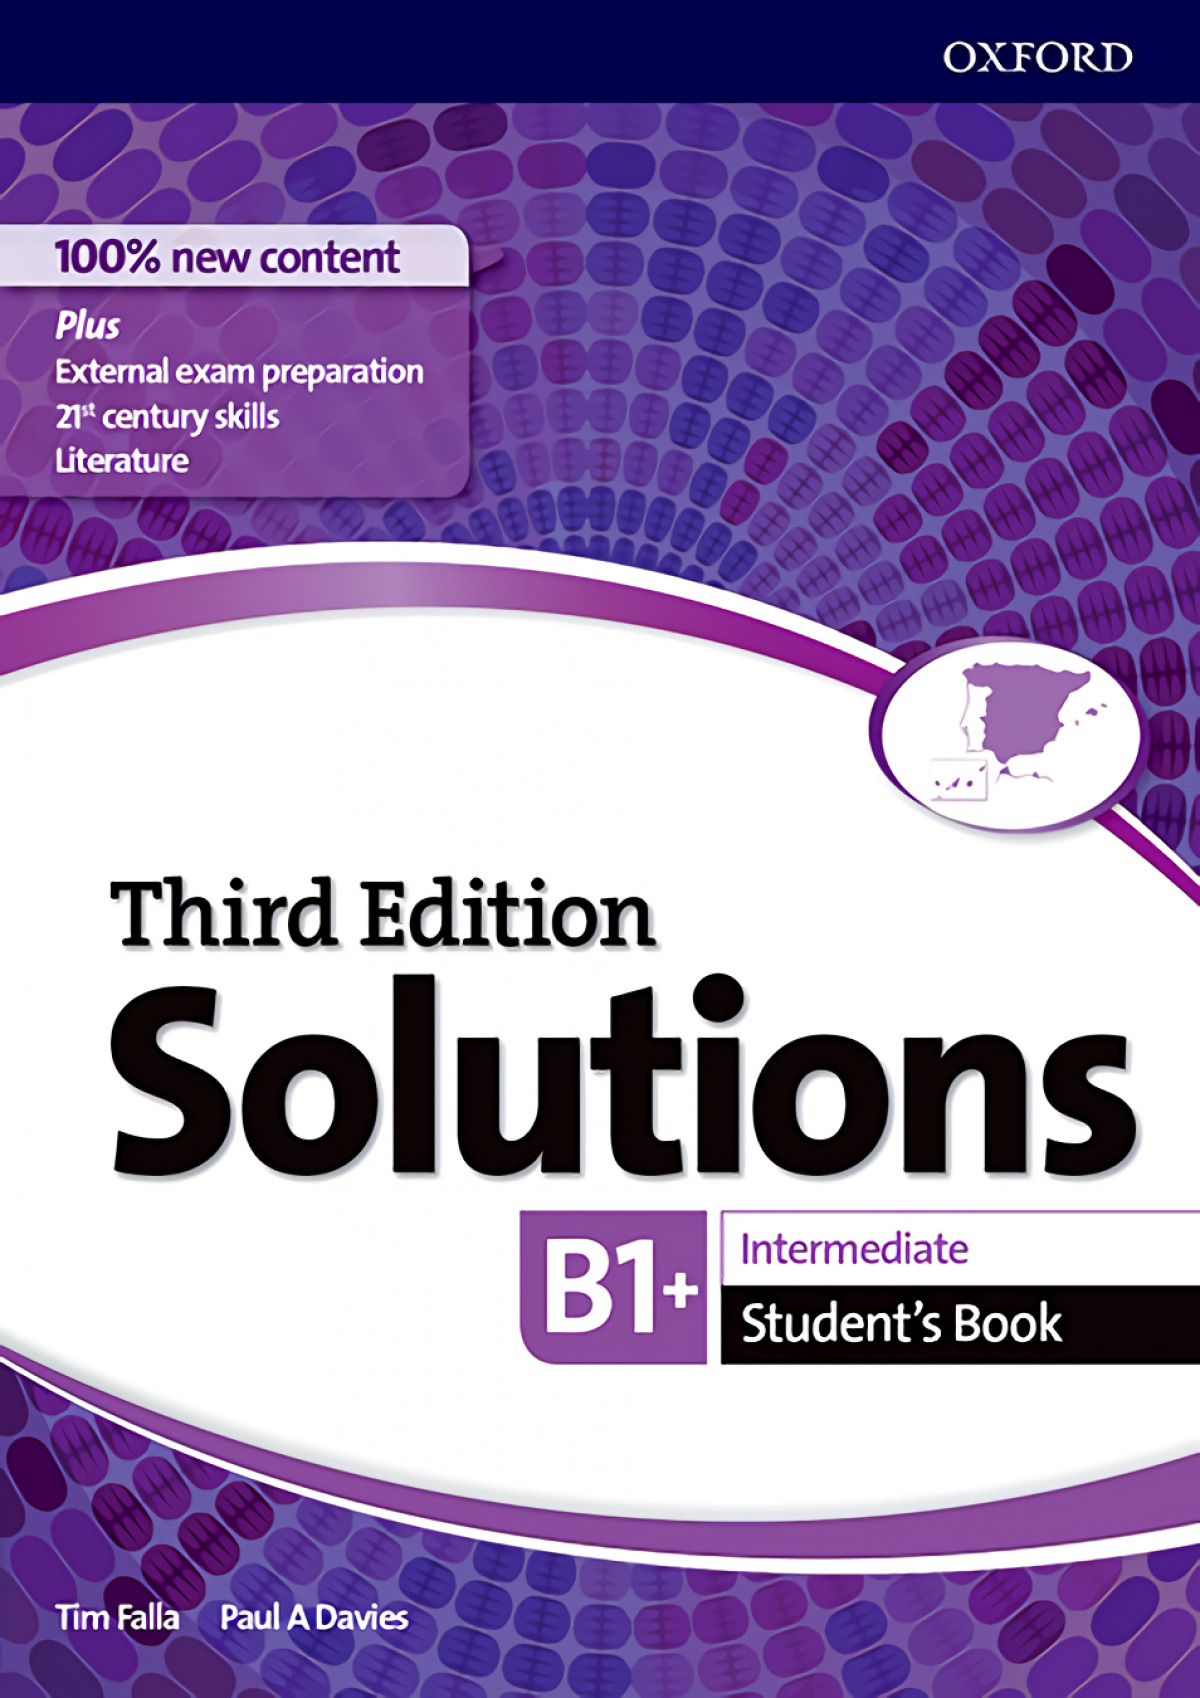 Solutions 3 edition tests. Solutions third Edition pre-Intermediate students 2g. Third Edition solutions Intermediate student book пдф. Solution Intermediate 3 Edition Workbook. Solution Intermediate student's book tim Falla.